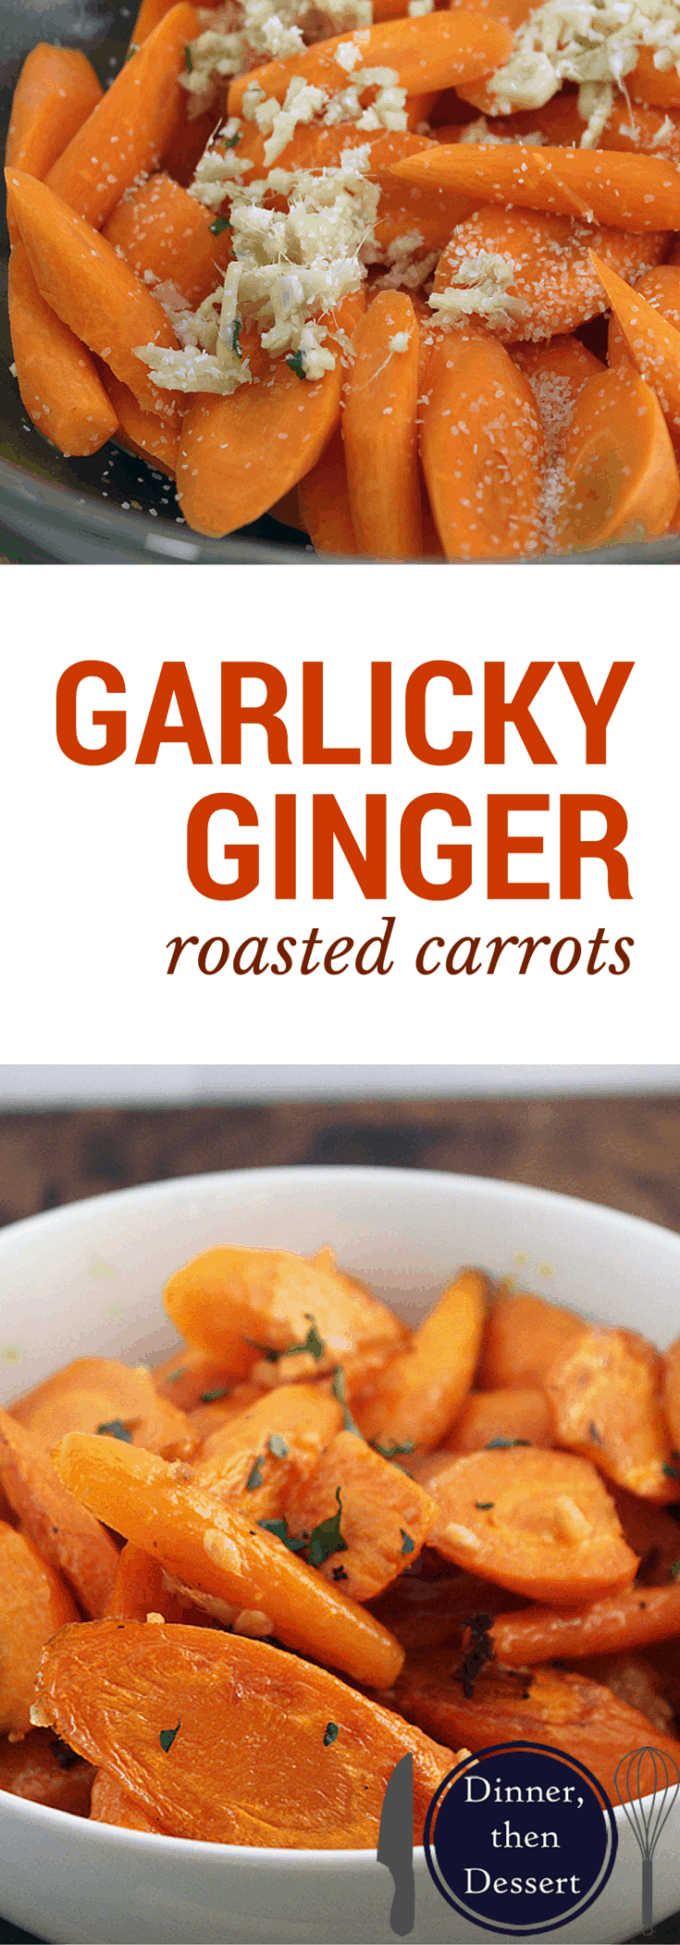 Just a few ingredients take roasted carrots to a whole new level! Great with Asian dishes or grilled meats.